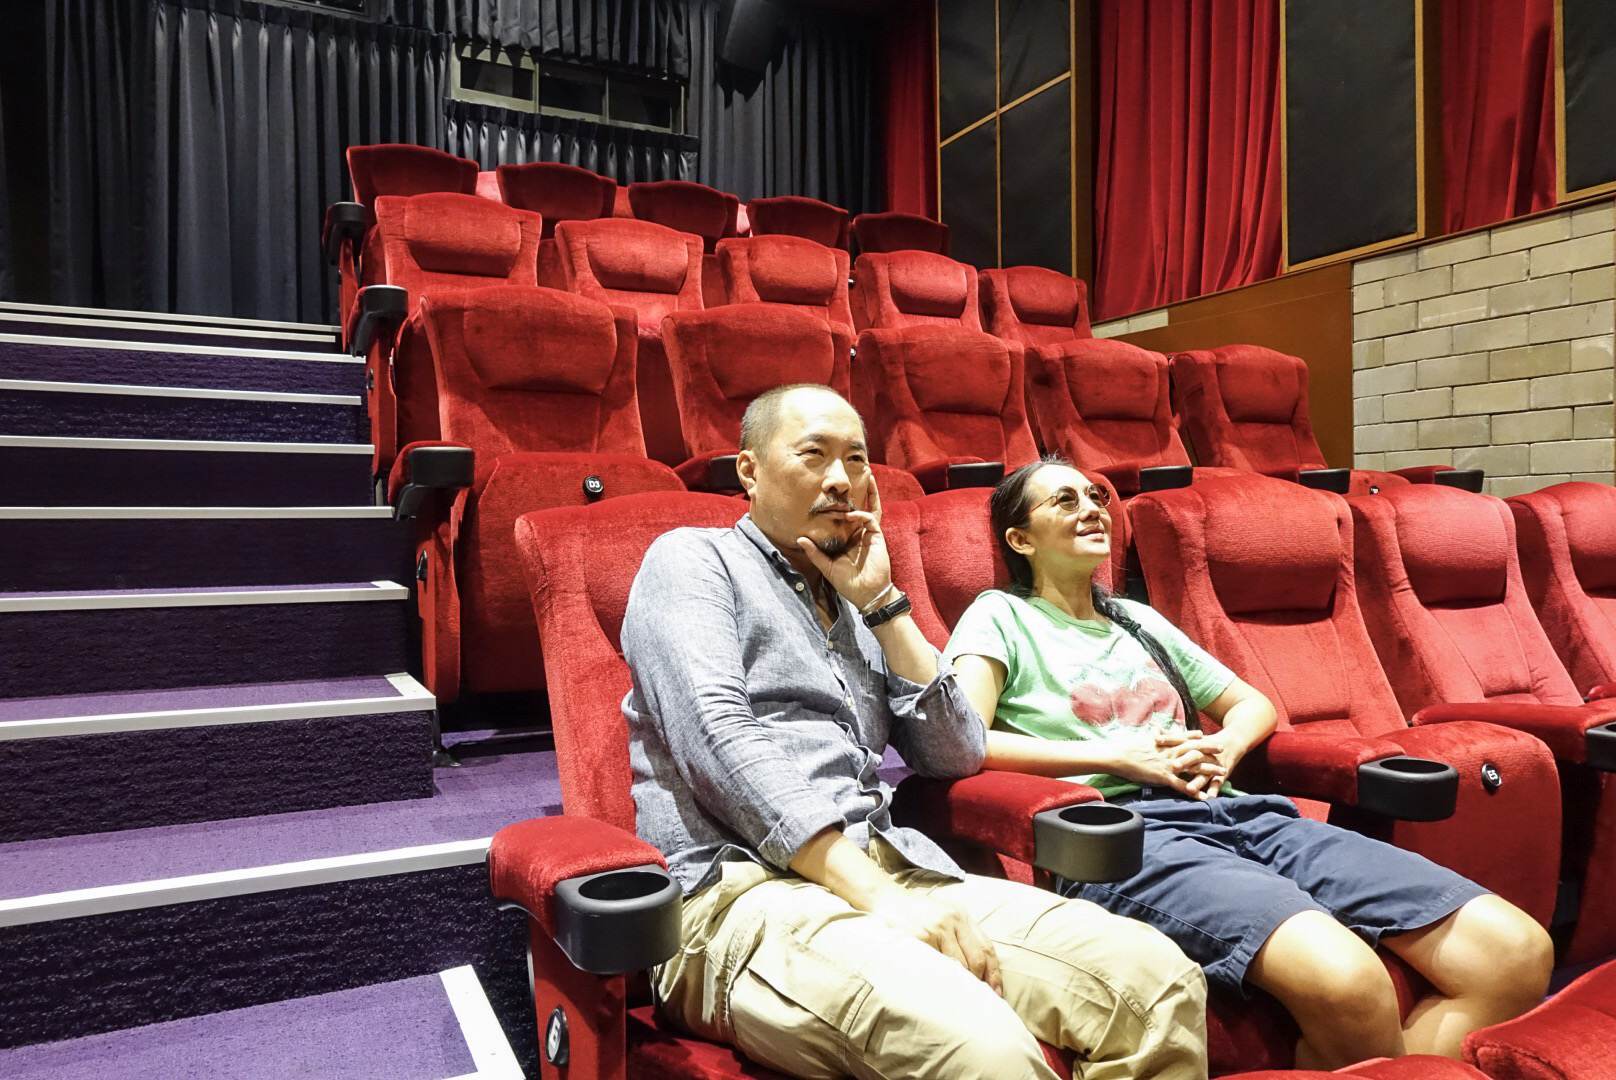 Makers of Banned Films Ready Arthouse Theater For Bangkok1616 x 1080